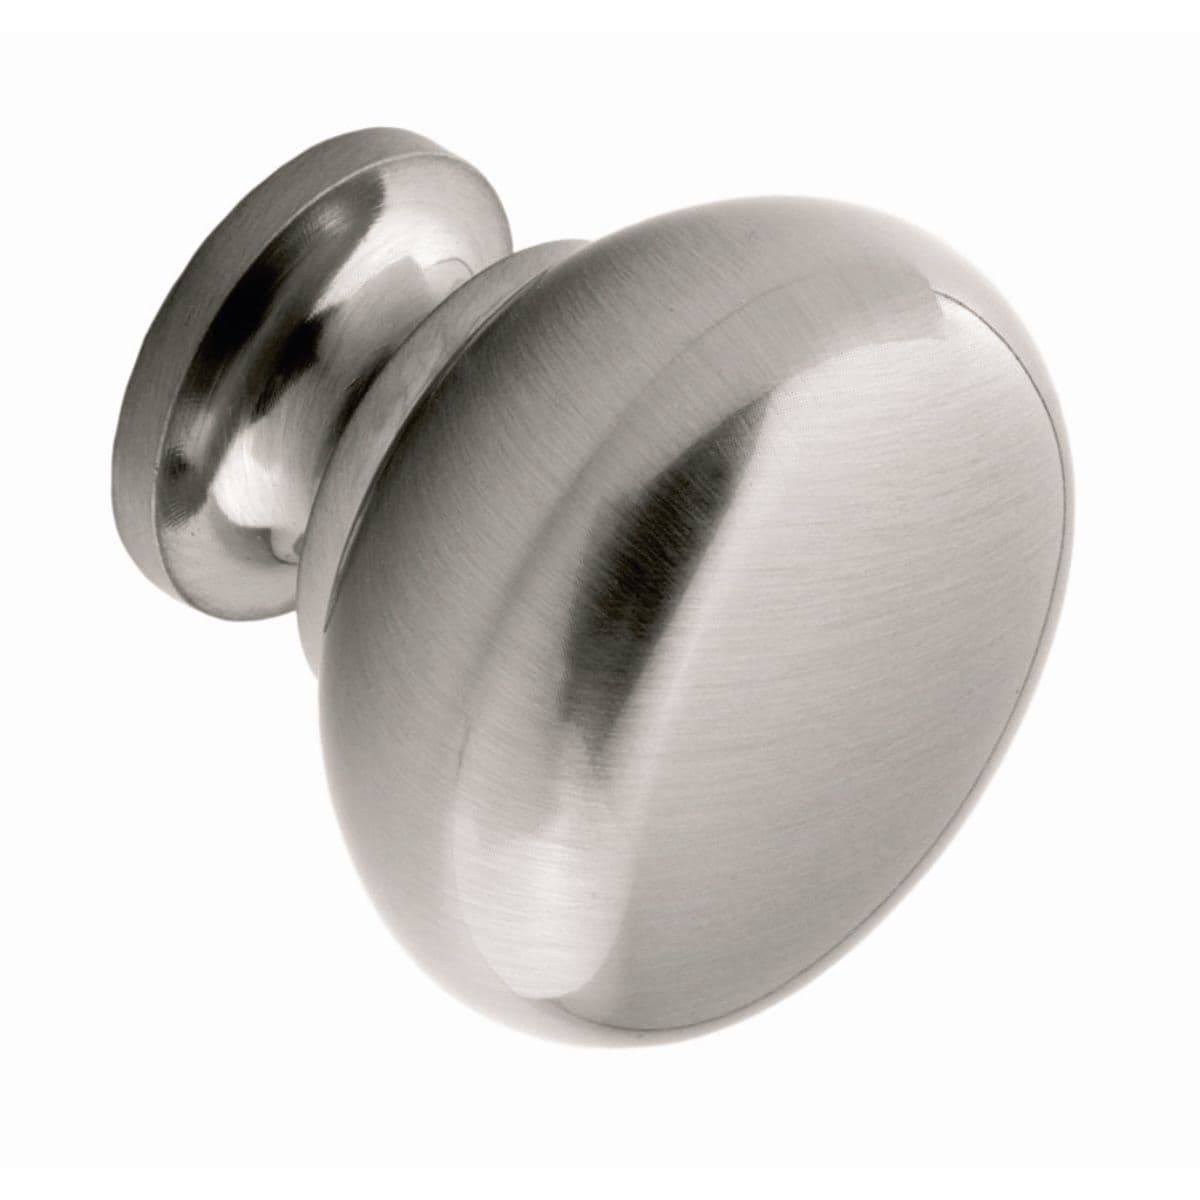 PORTLAND HOLLOW KNOB Cupboard Handle - 32mm dia - BRUSHED STAINLESS STEEL EFFECT finish (PWS TK2SS)